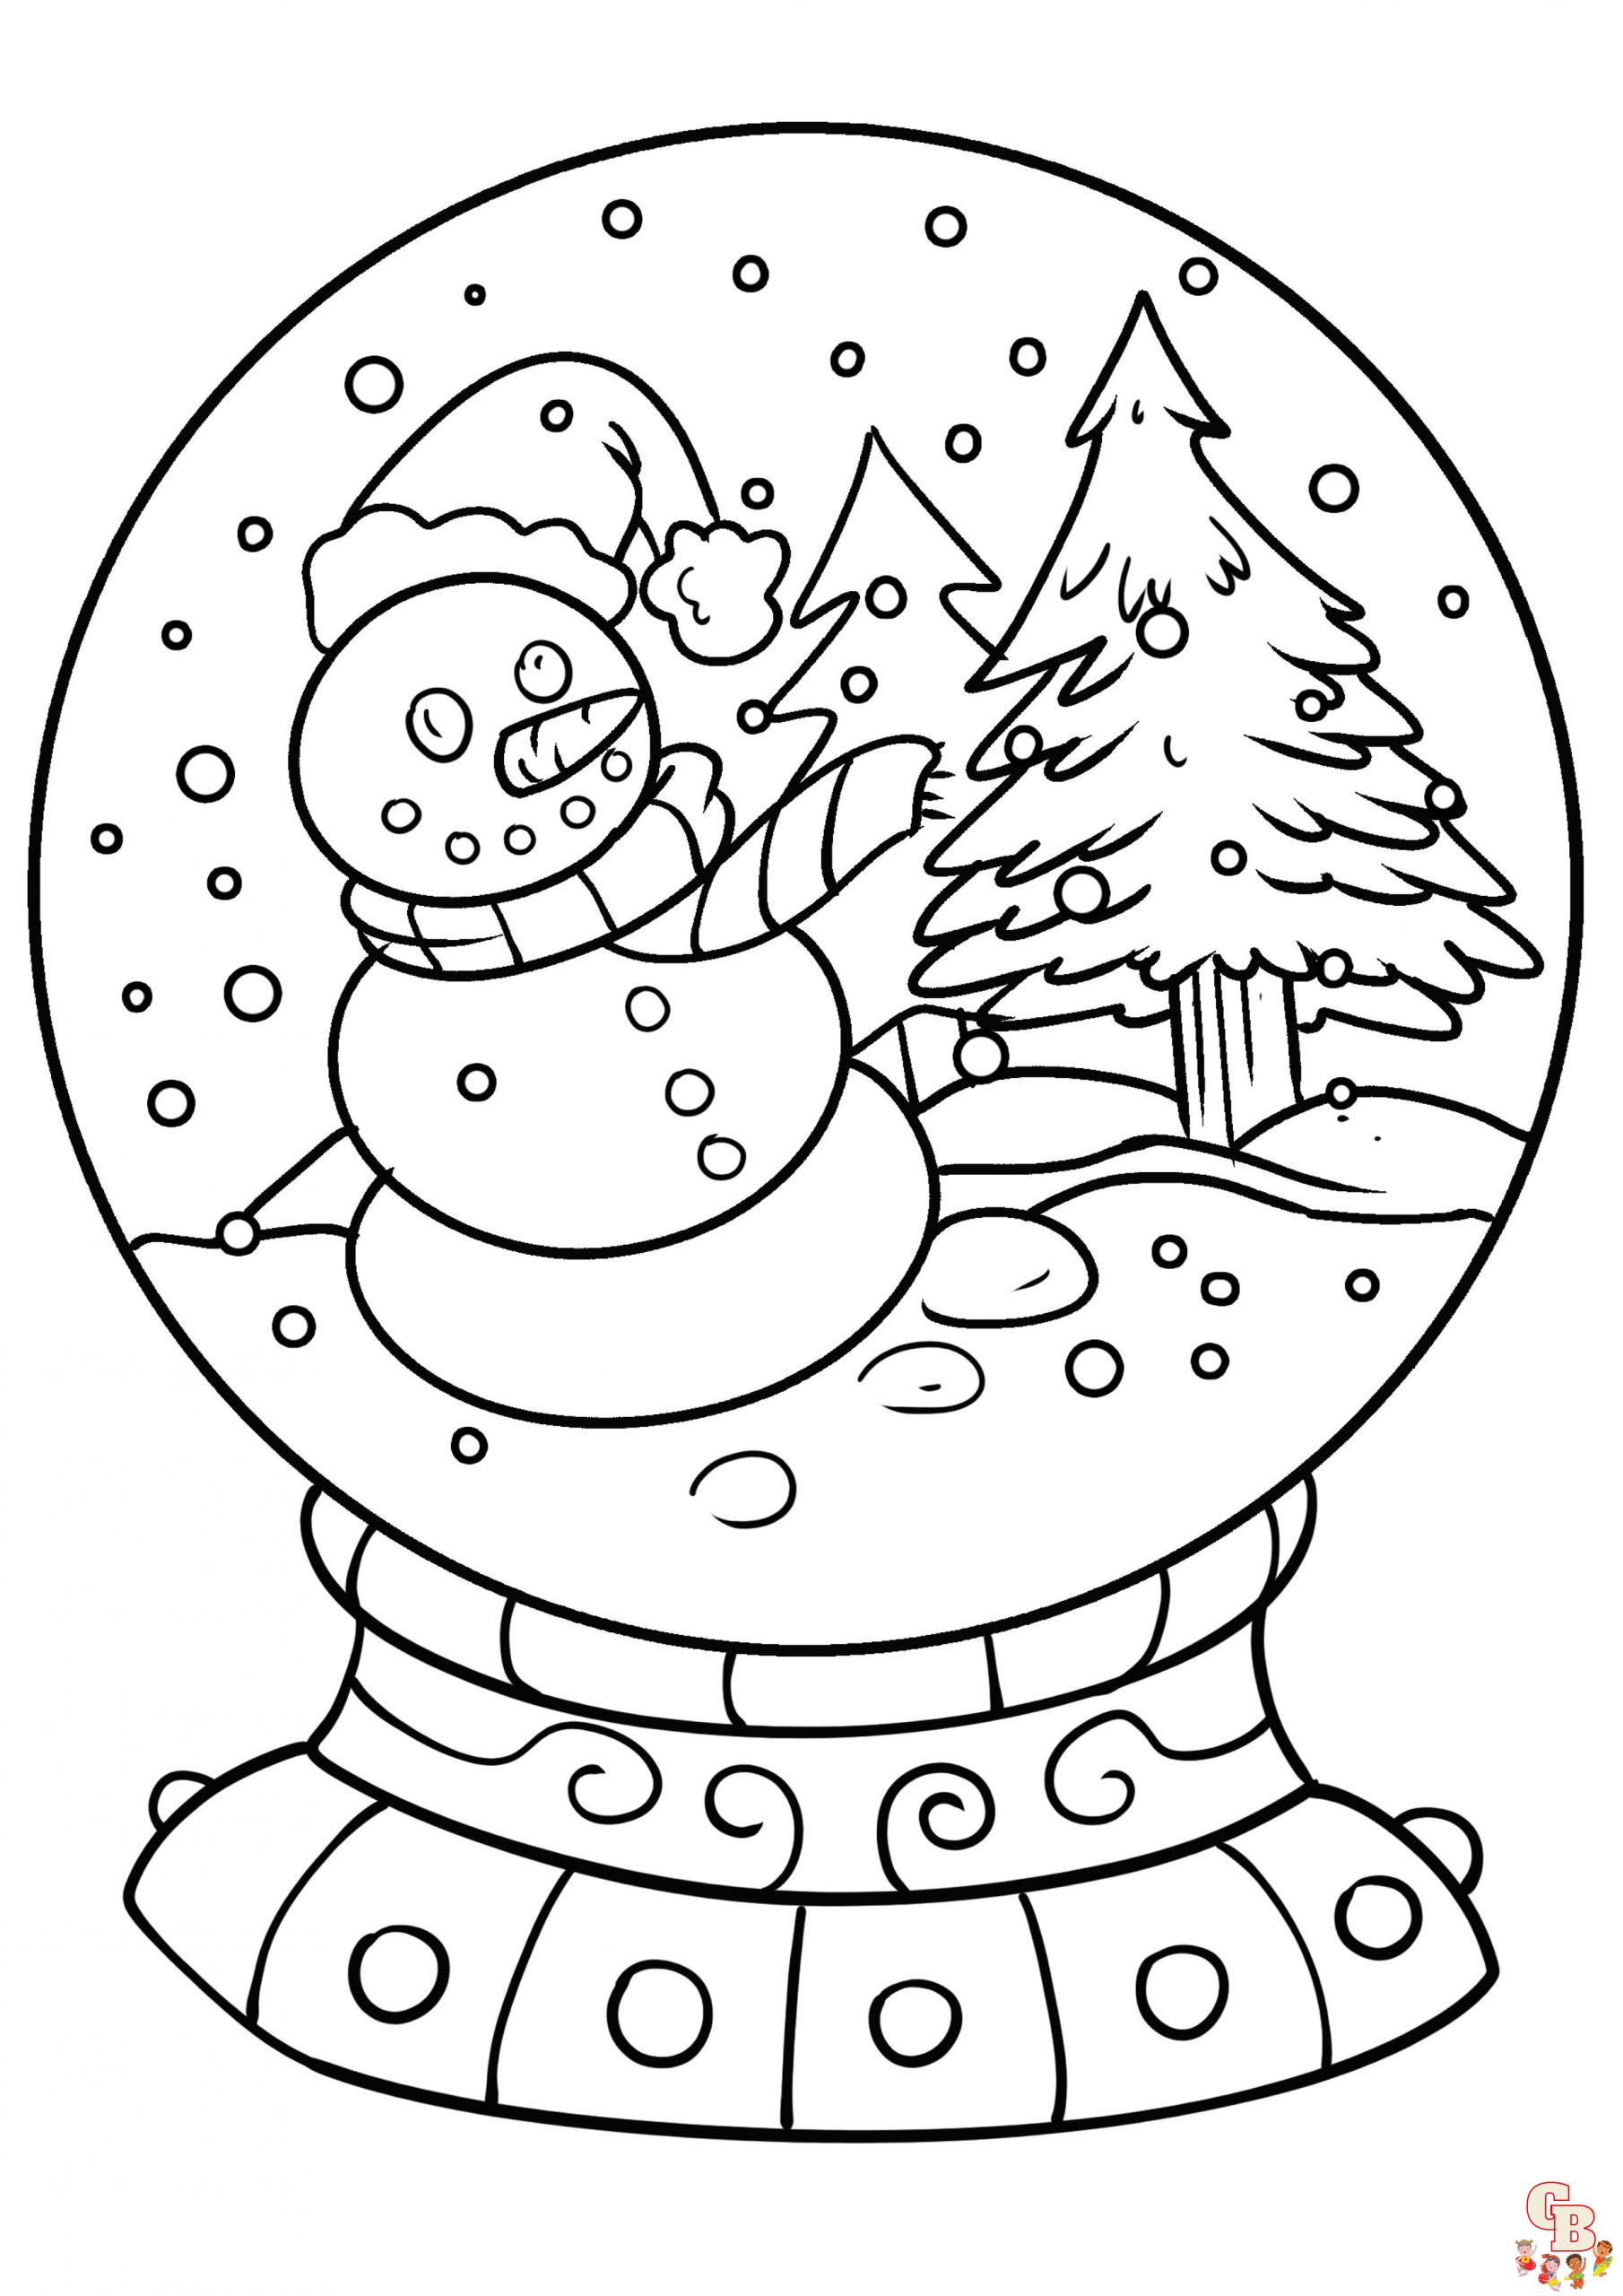 Fun and easy snowglobe coloring pages for kids free printable